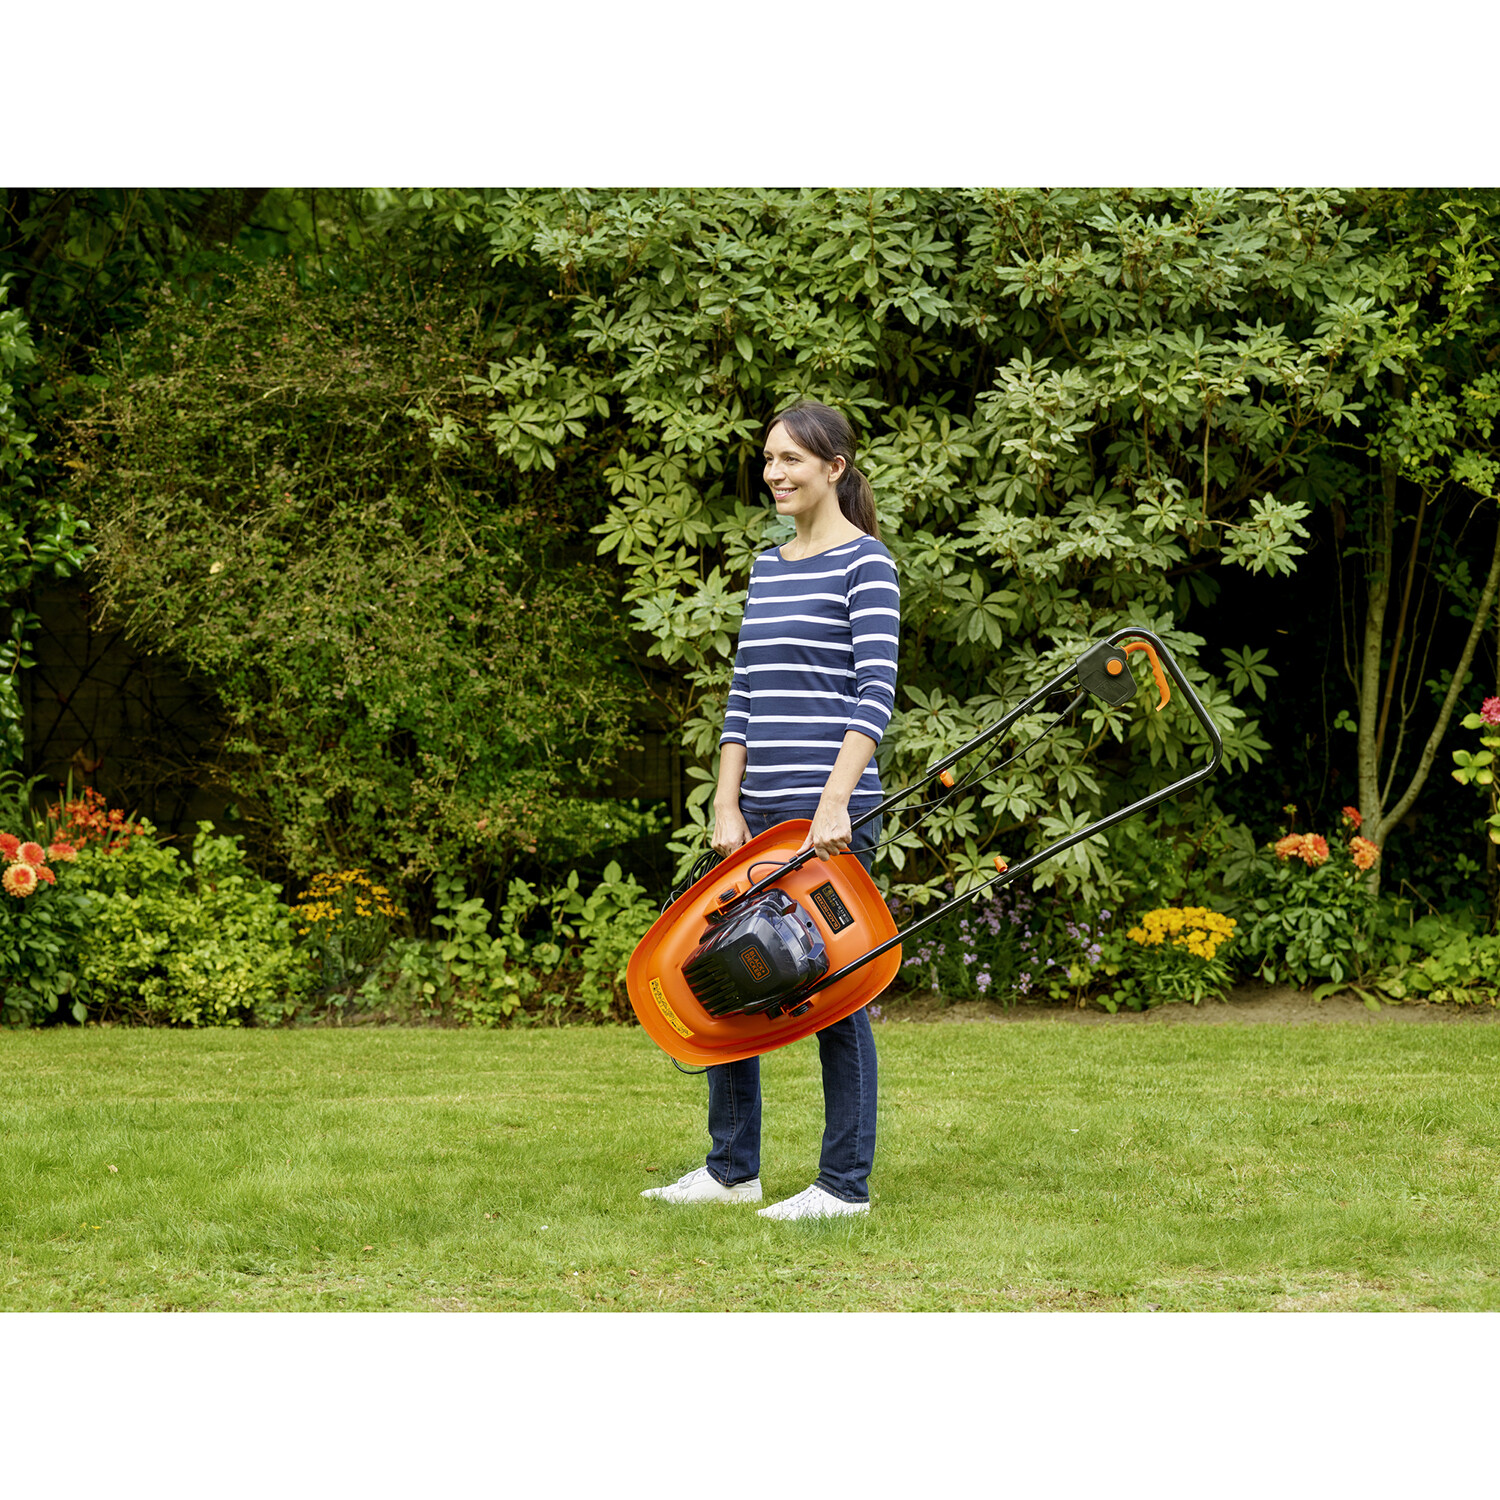 Black + Decker 1200W Hand Propelled 30cm Rotary Electric Lawn Mower Image 4